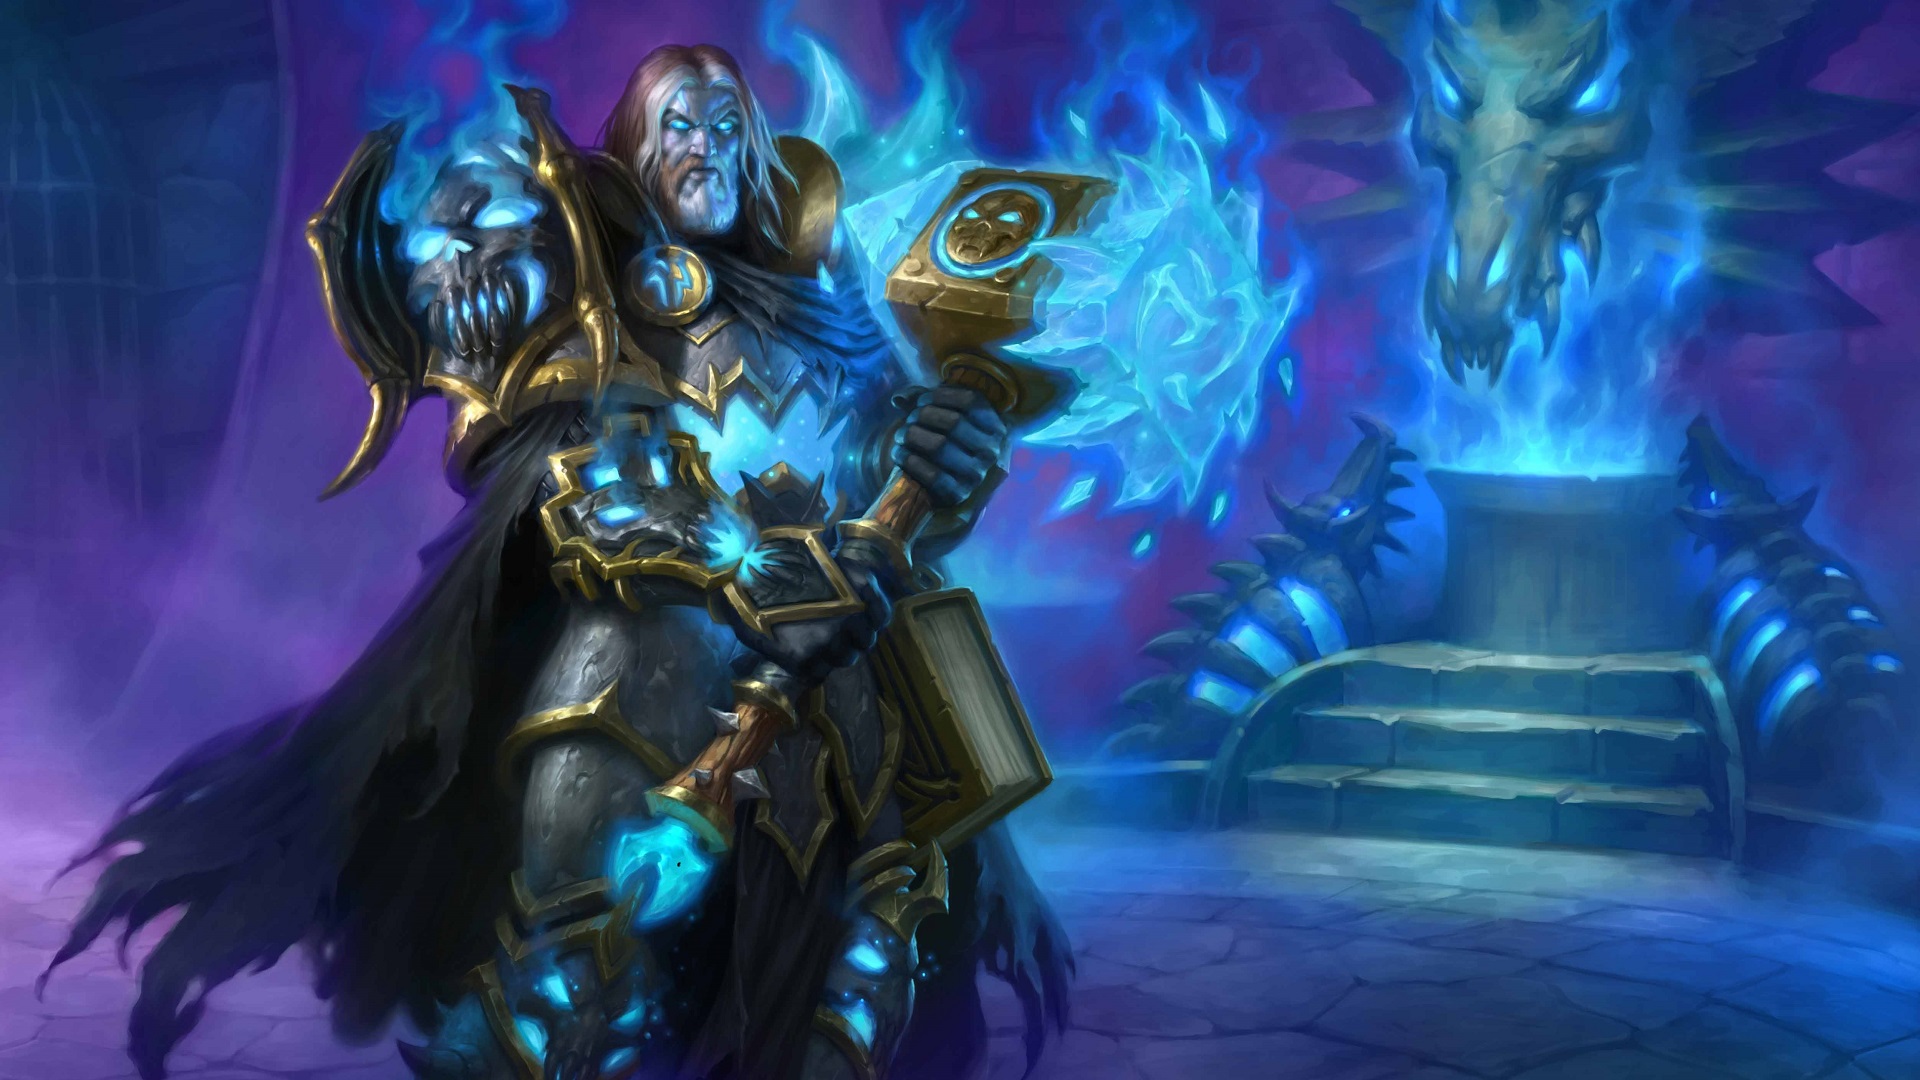 General 1920x1080 Hearthstone: Heroes of Warcraft Hearthstone Warcraft cards artwork Knights of the frozen throne Death Knight Uther the Lightbringer video games video game characters Blizzard Entertainment